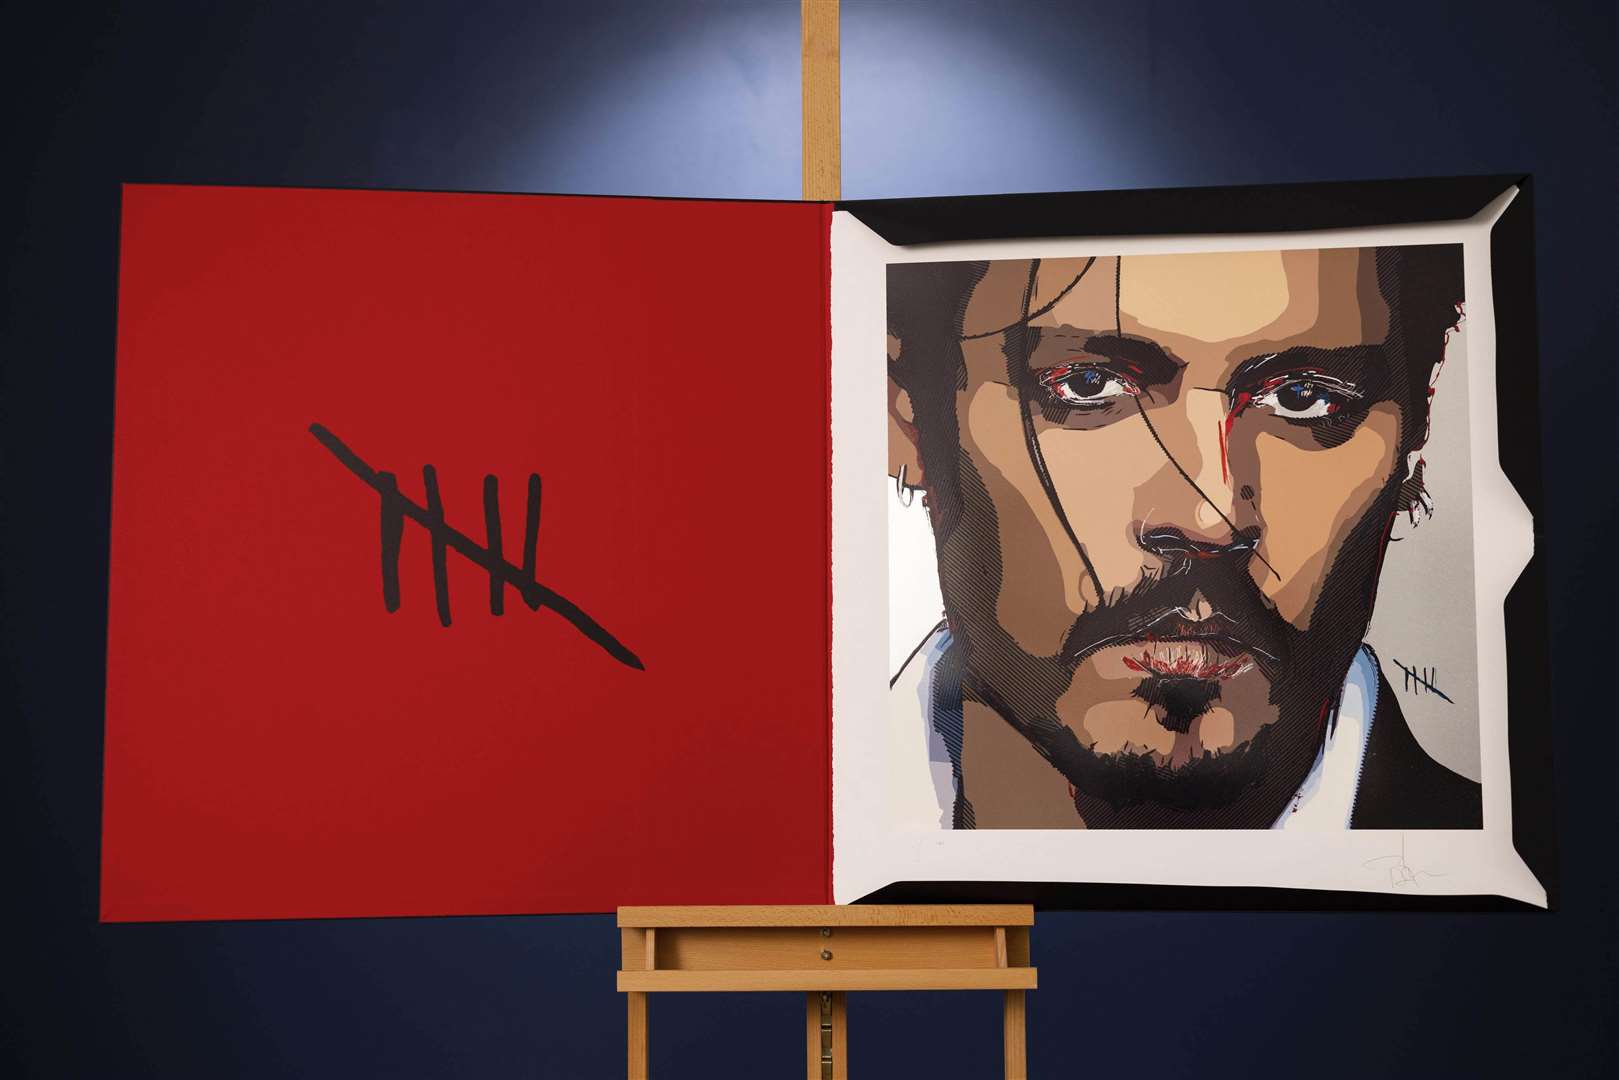 The self-portrait by Johnny Depp features five tally marks (David Parry/PA)